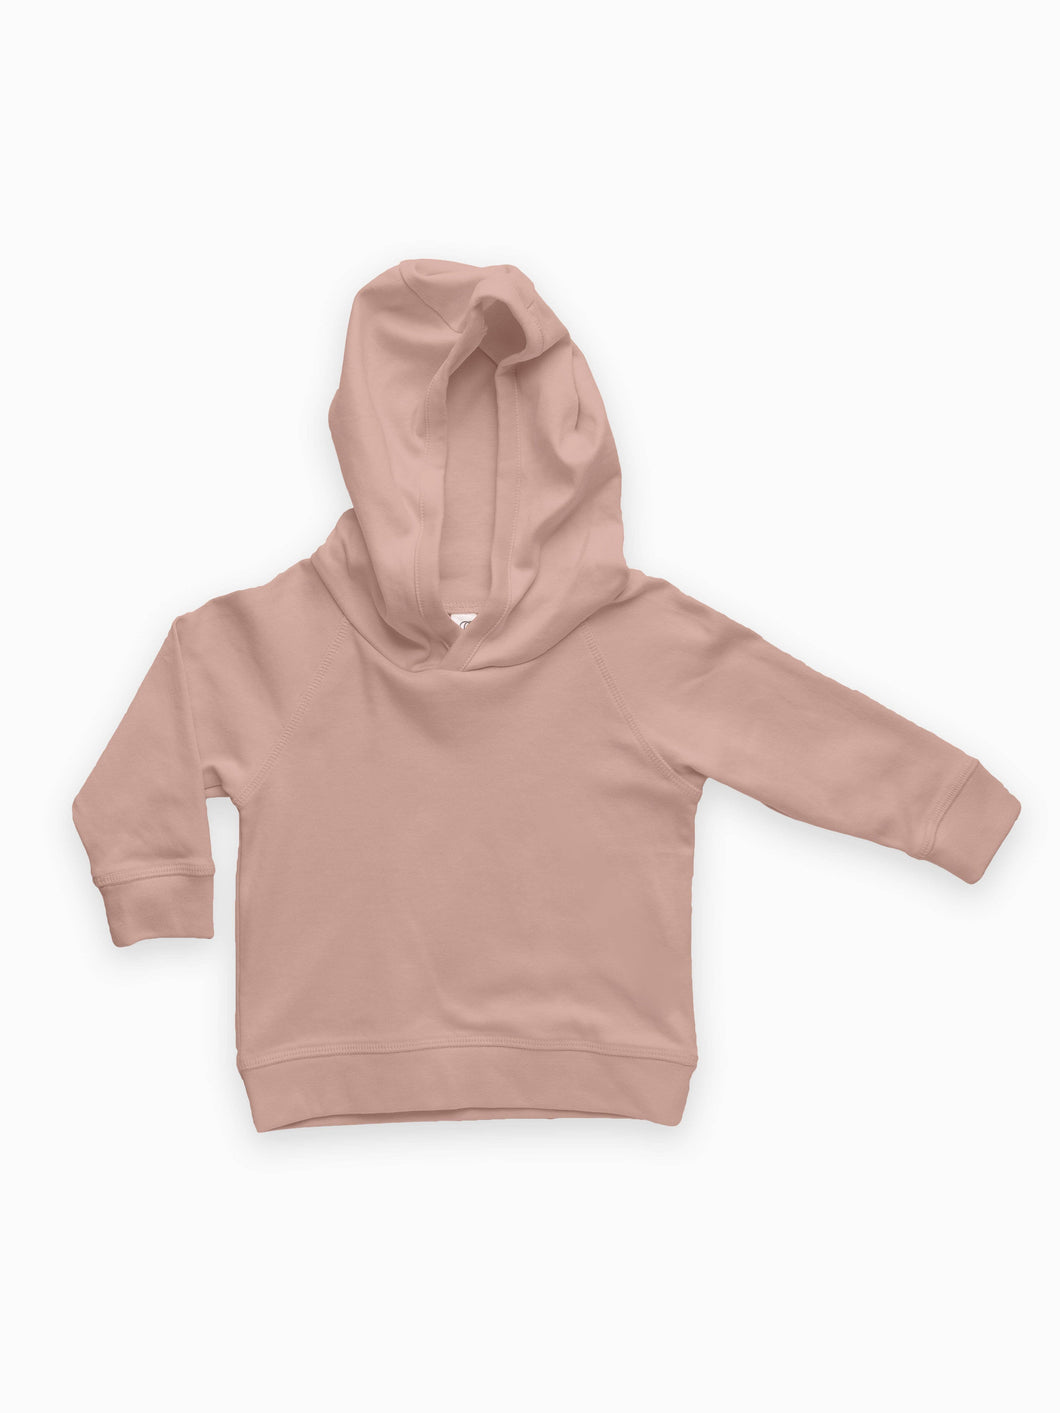 Madison Hooded Pullover - Blush